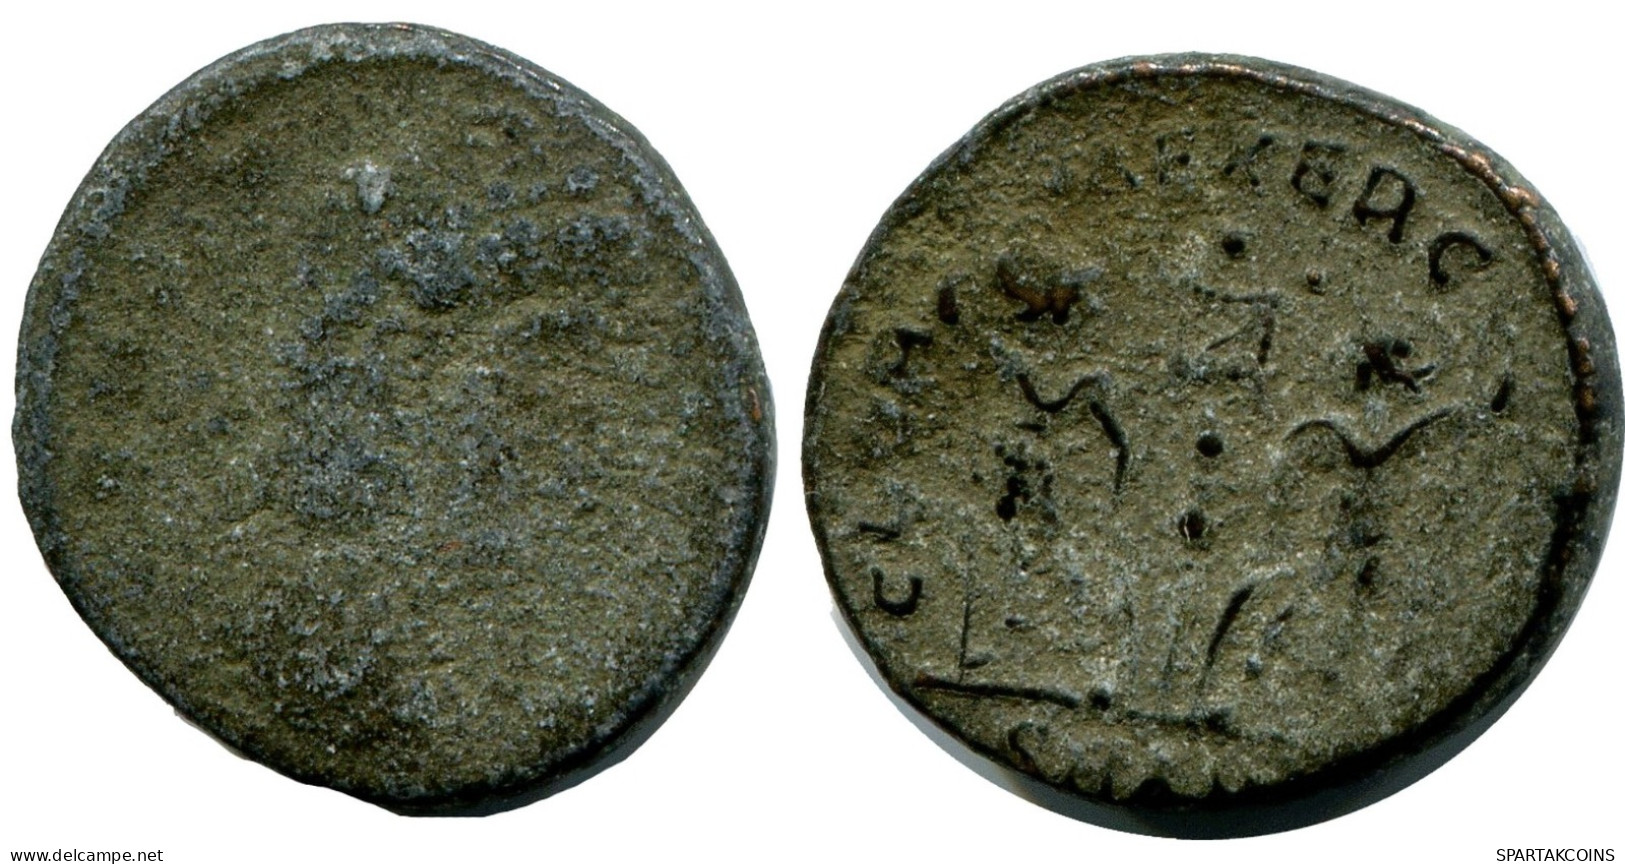 ROMAN Pièce MINTED IN ALEKSANDRIA FOUND IN IHNASYAH HOARD EGYPT #ANC10150.14.F.A - The Christian Empire (307 AD To 363 AD)